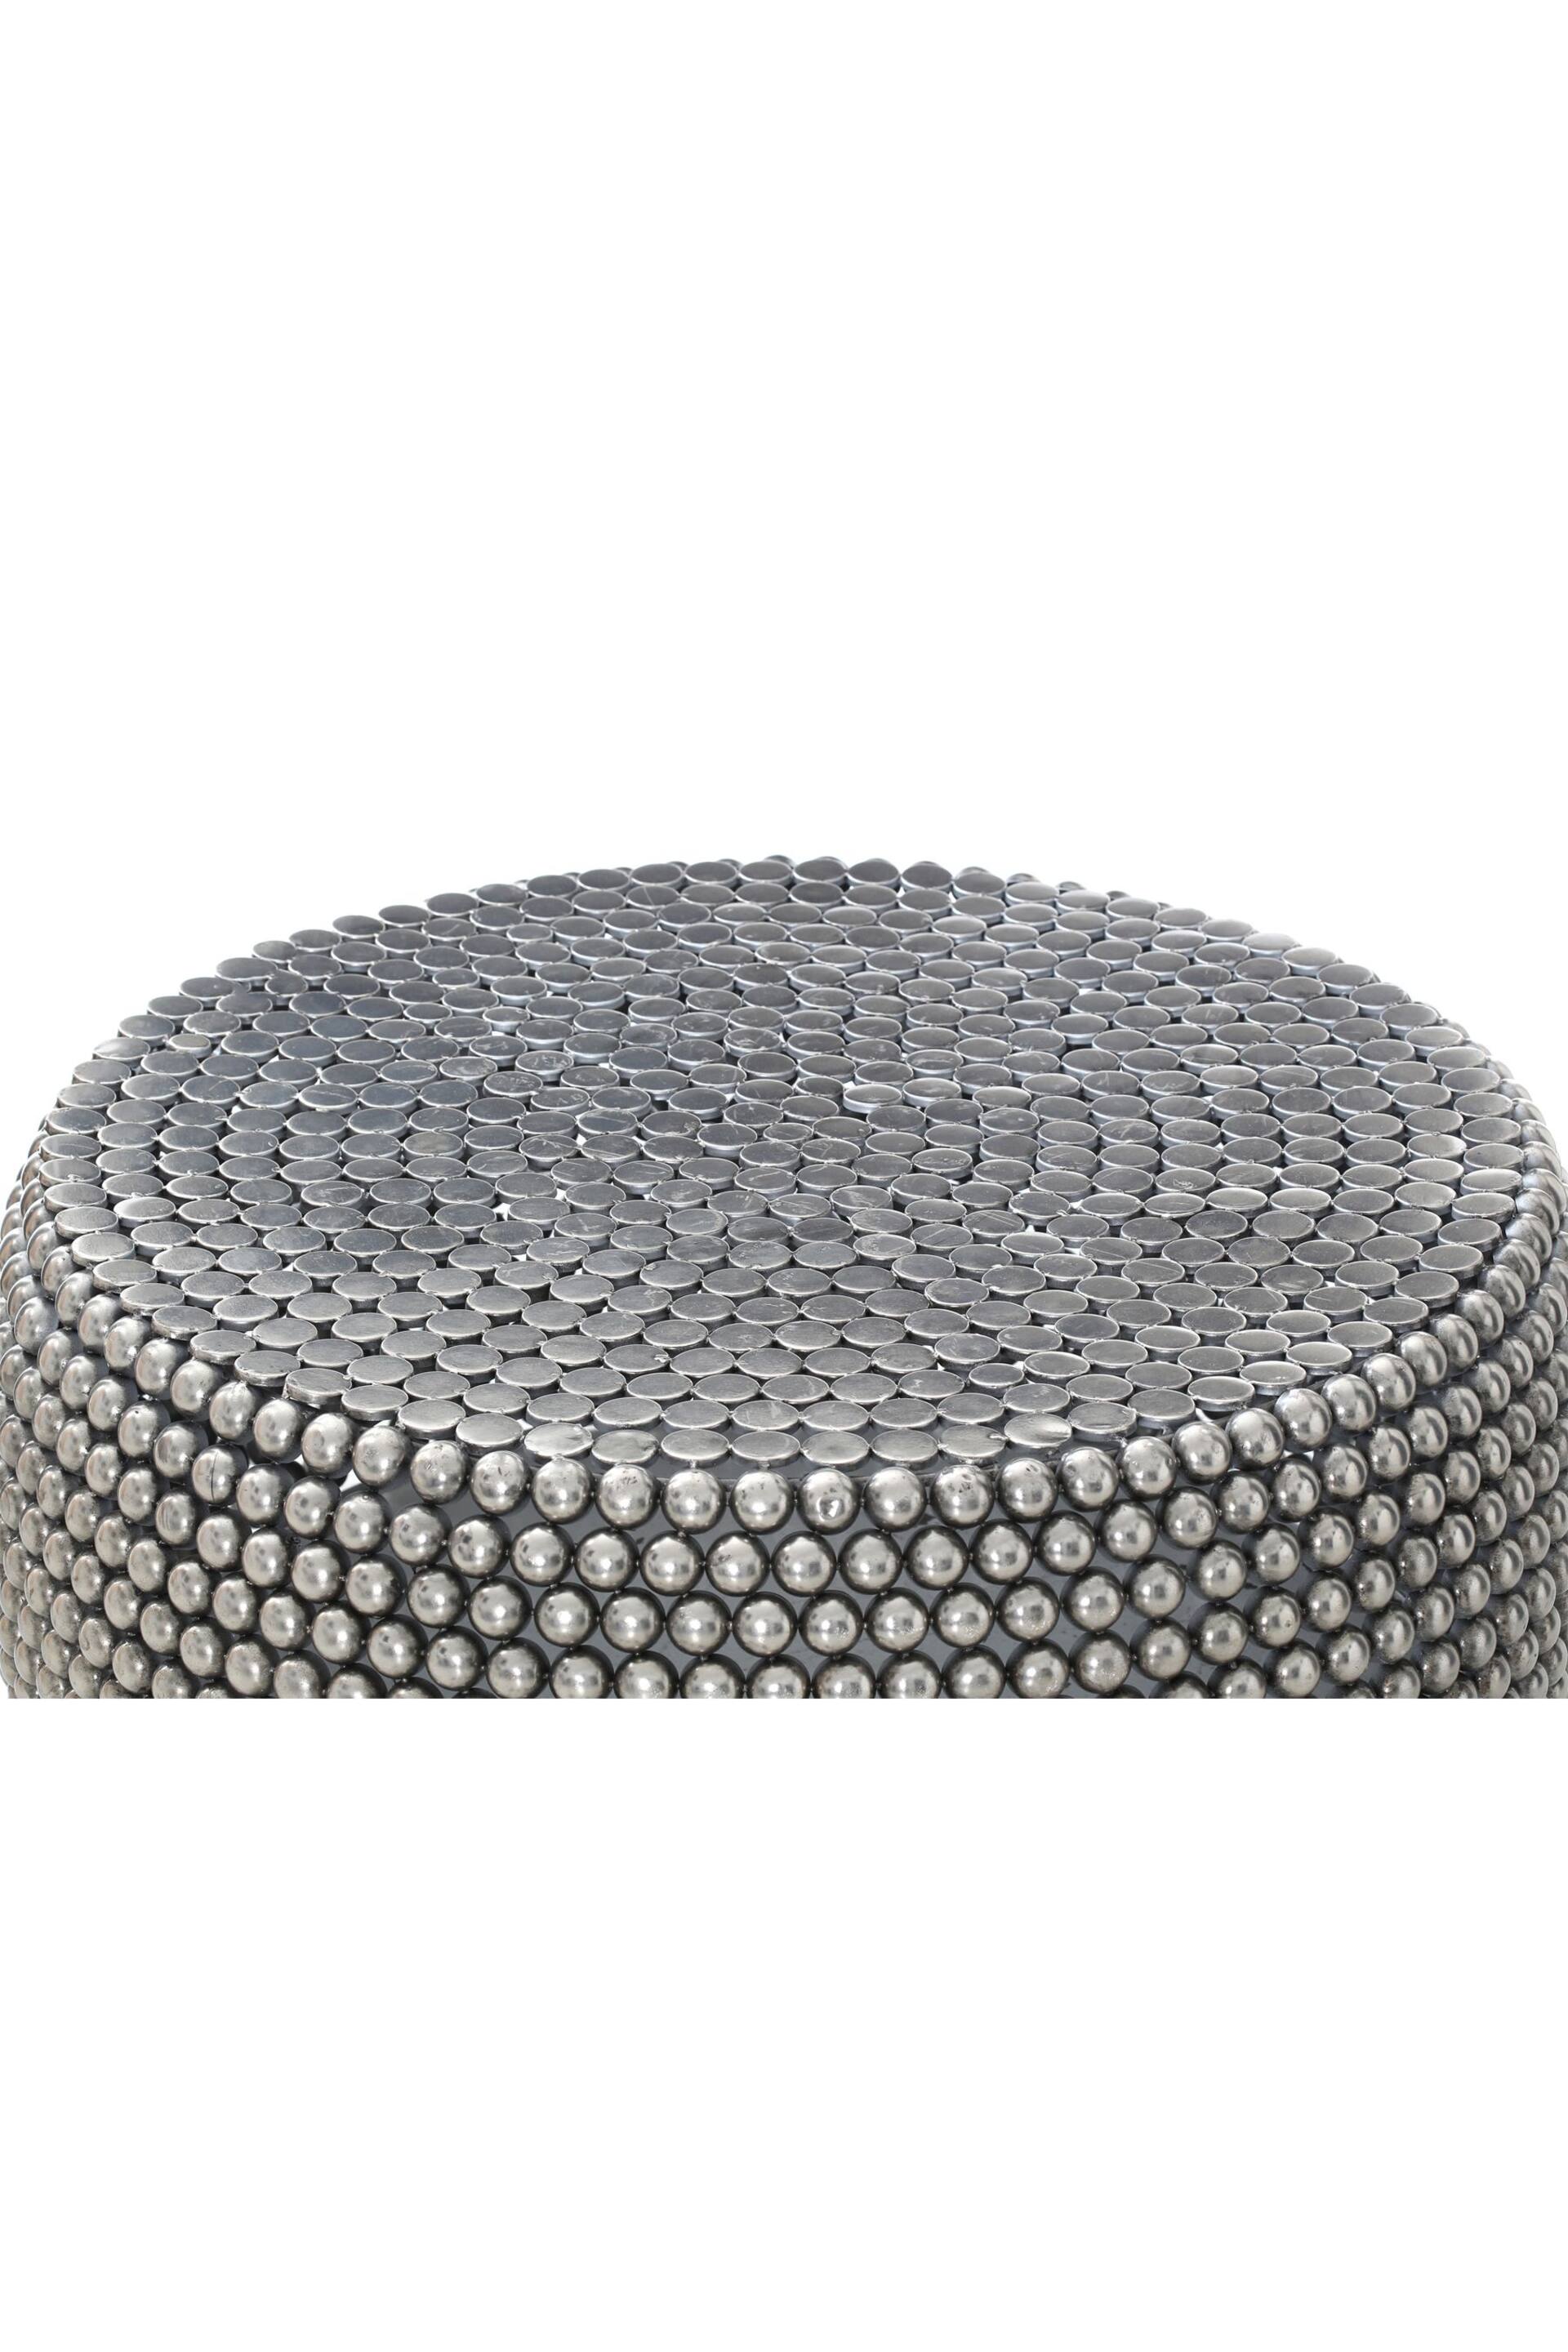 Fifty Five South Silver Templar Beaded Iron Coffee Table - Image 3 of 4